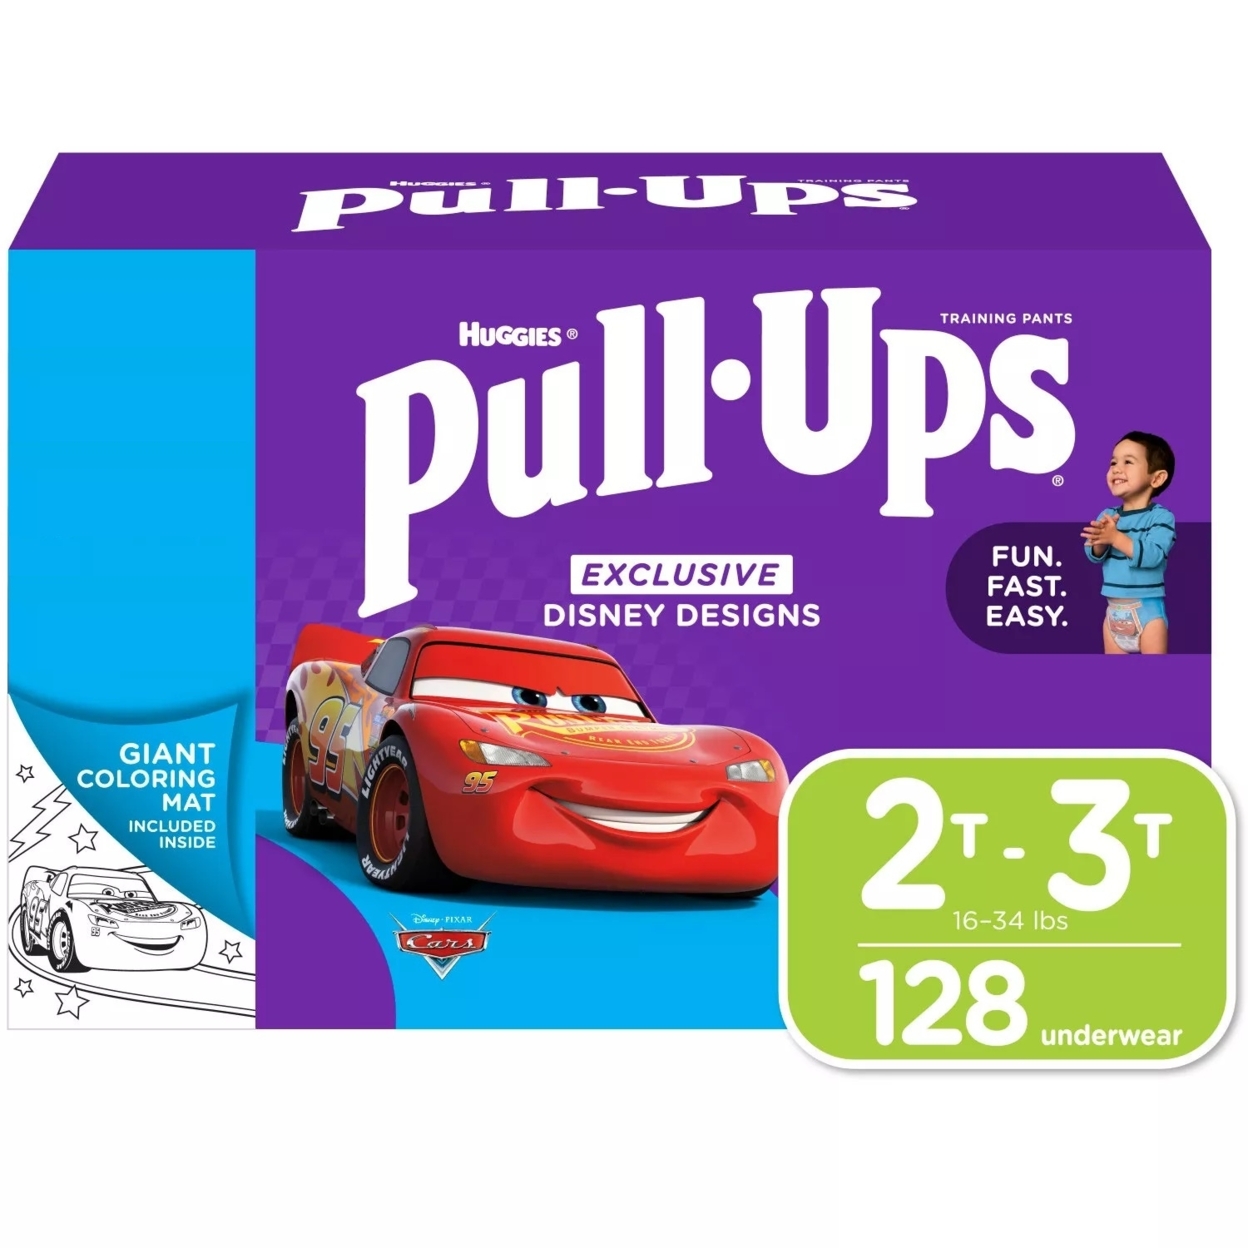 Huggies Pull-Ups Training Pants For Boys, 2T-3T 18-34 Pounds (128 Count)